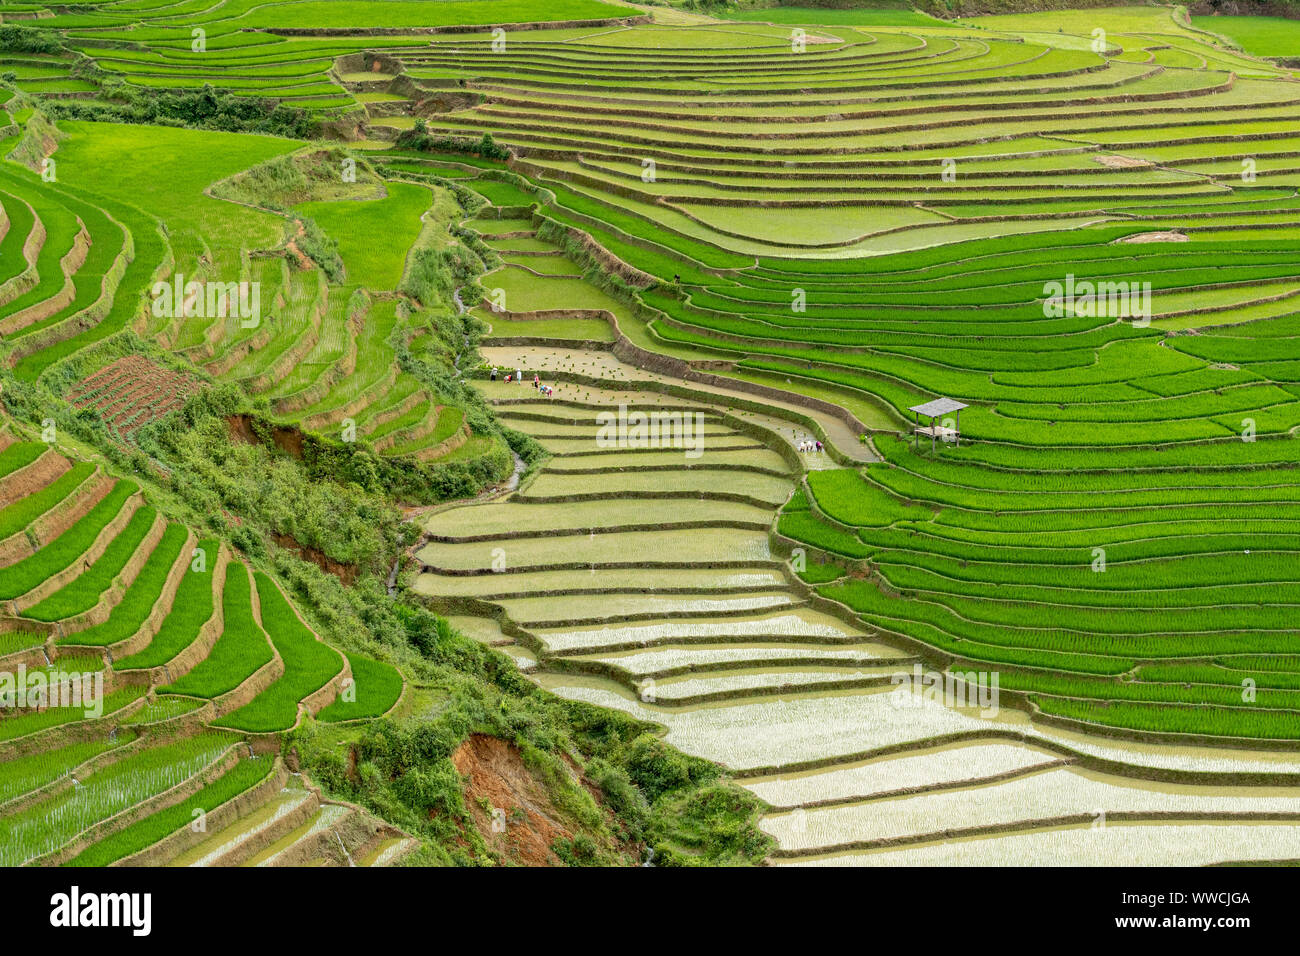 rice terraces make strong pattern Stock Photo